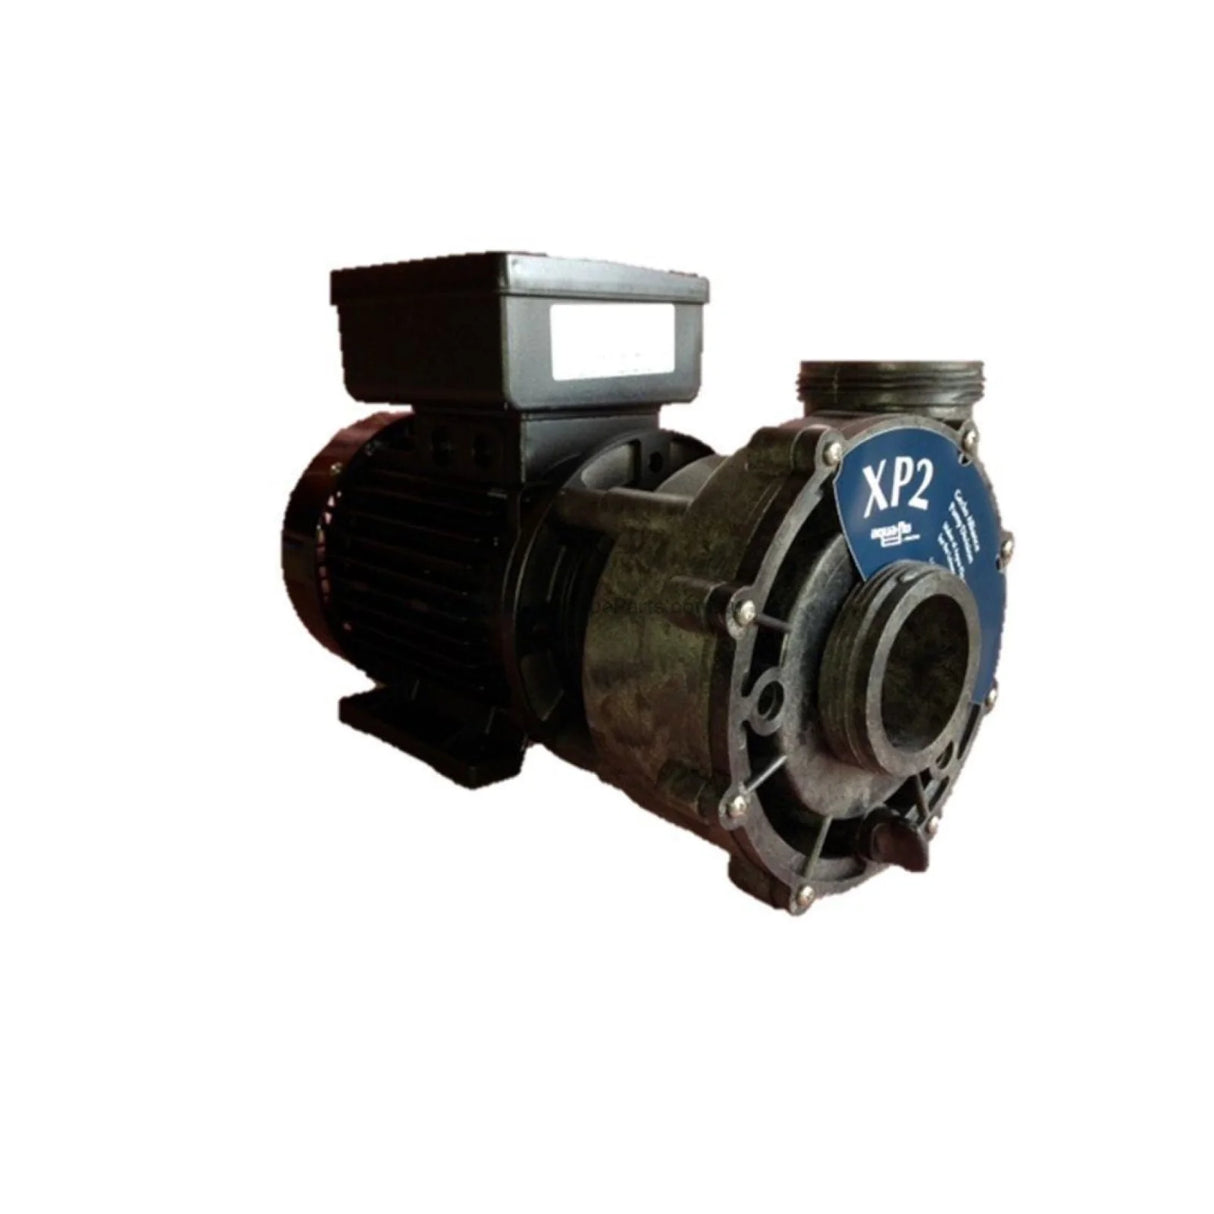 Aqua-Flo XP2 2.0HP - 2-Speed Flo-Master - Spa Jet Booster Pump - Heater and Spa Parts